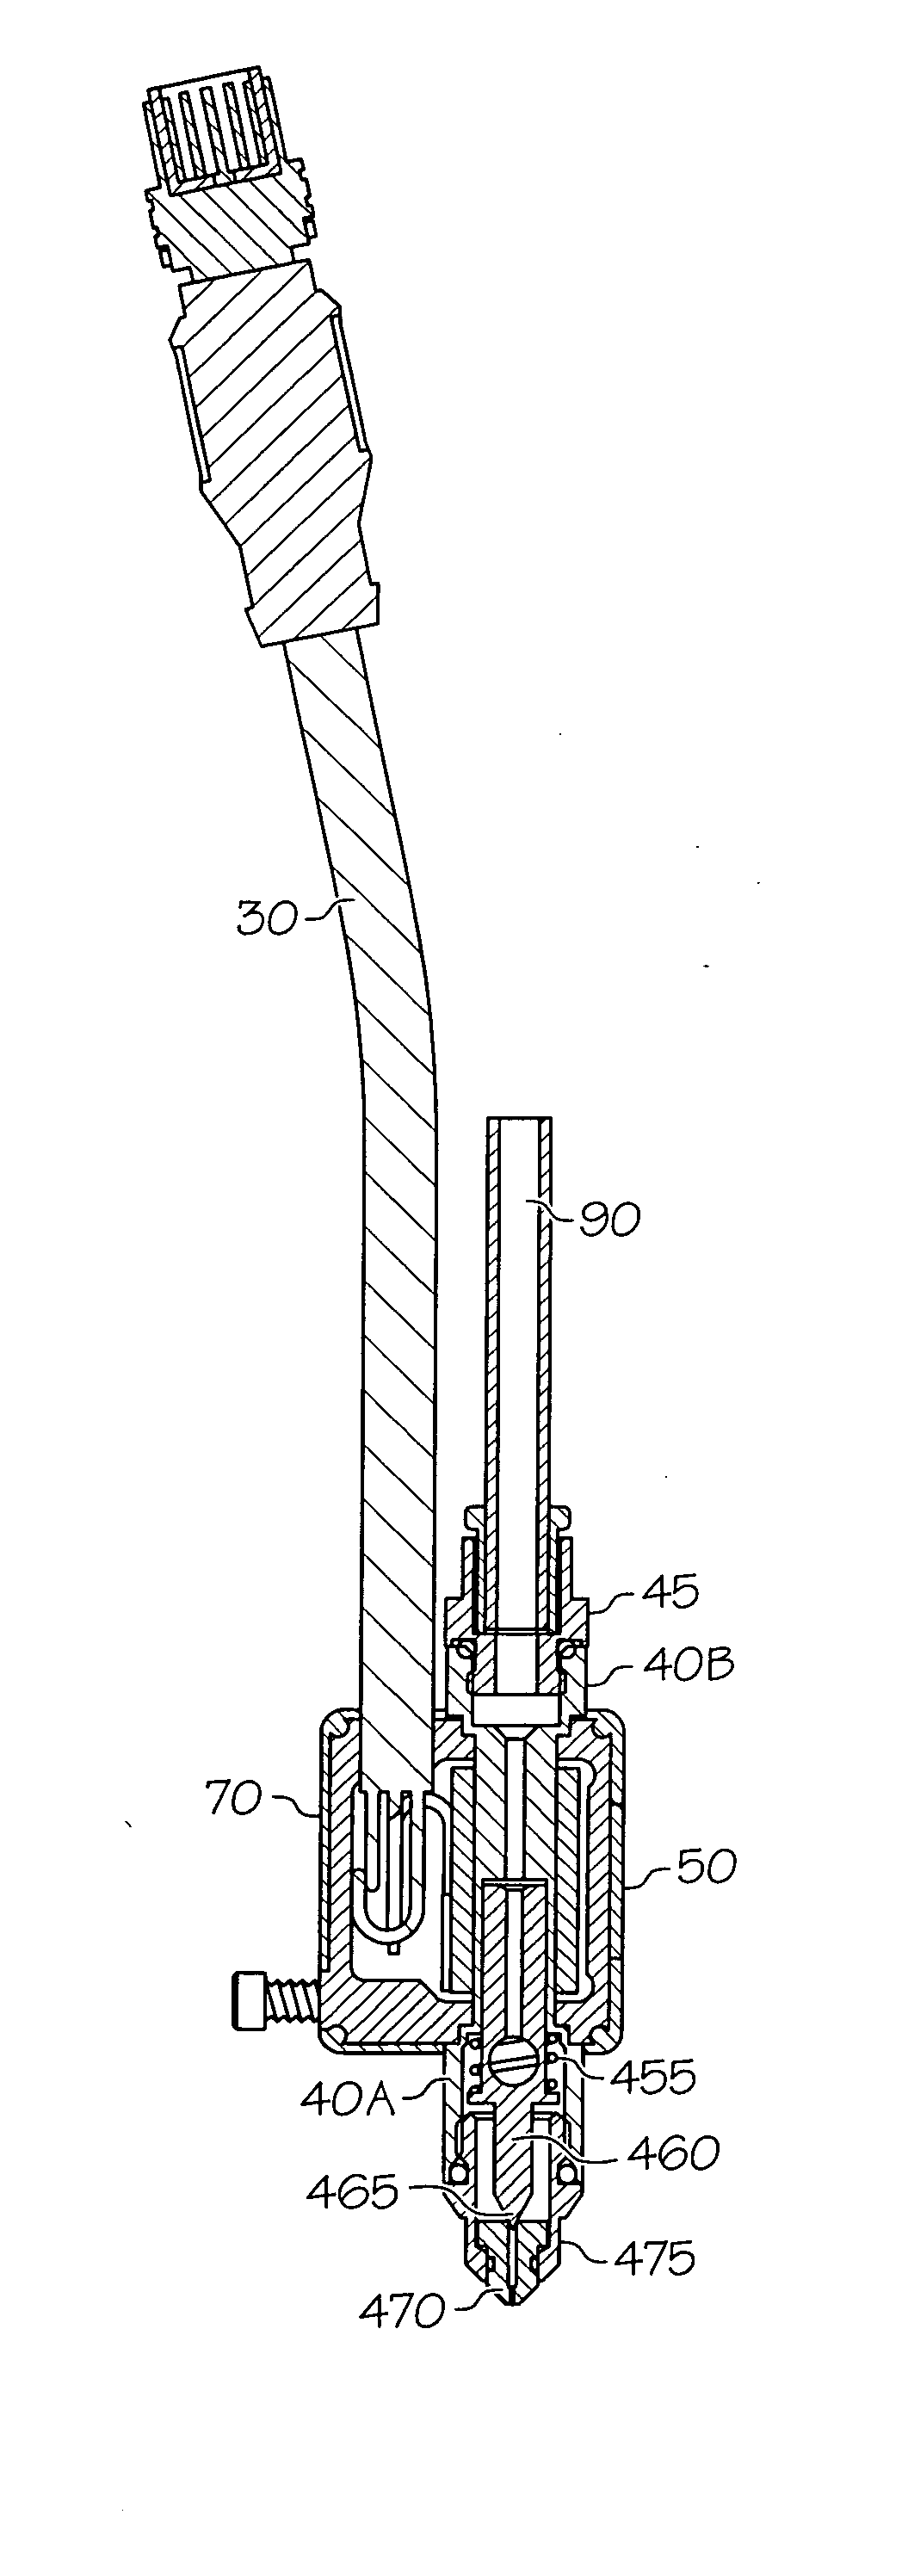 Solenoid-operated fluid valve and assembly incorporating same